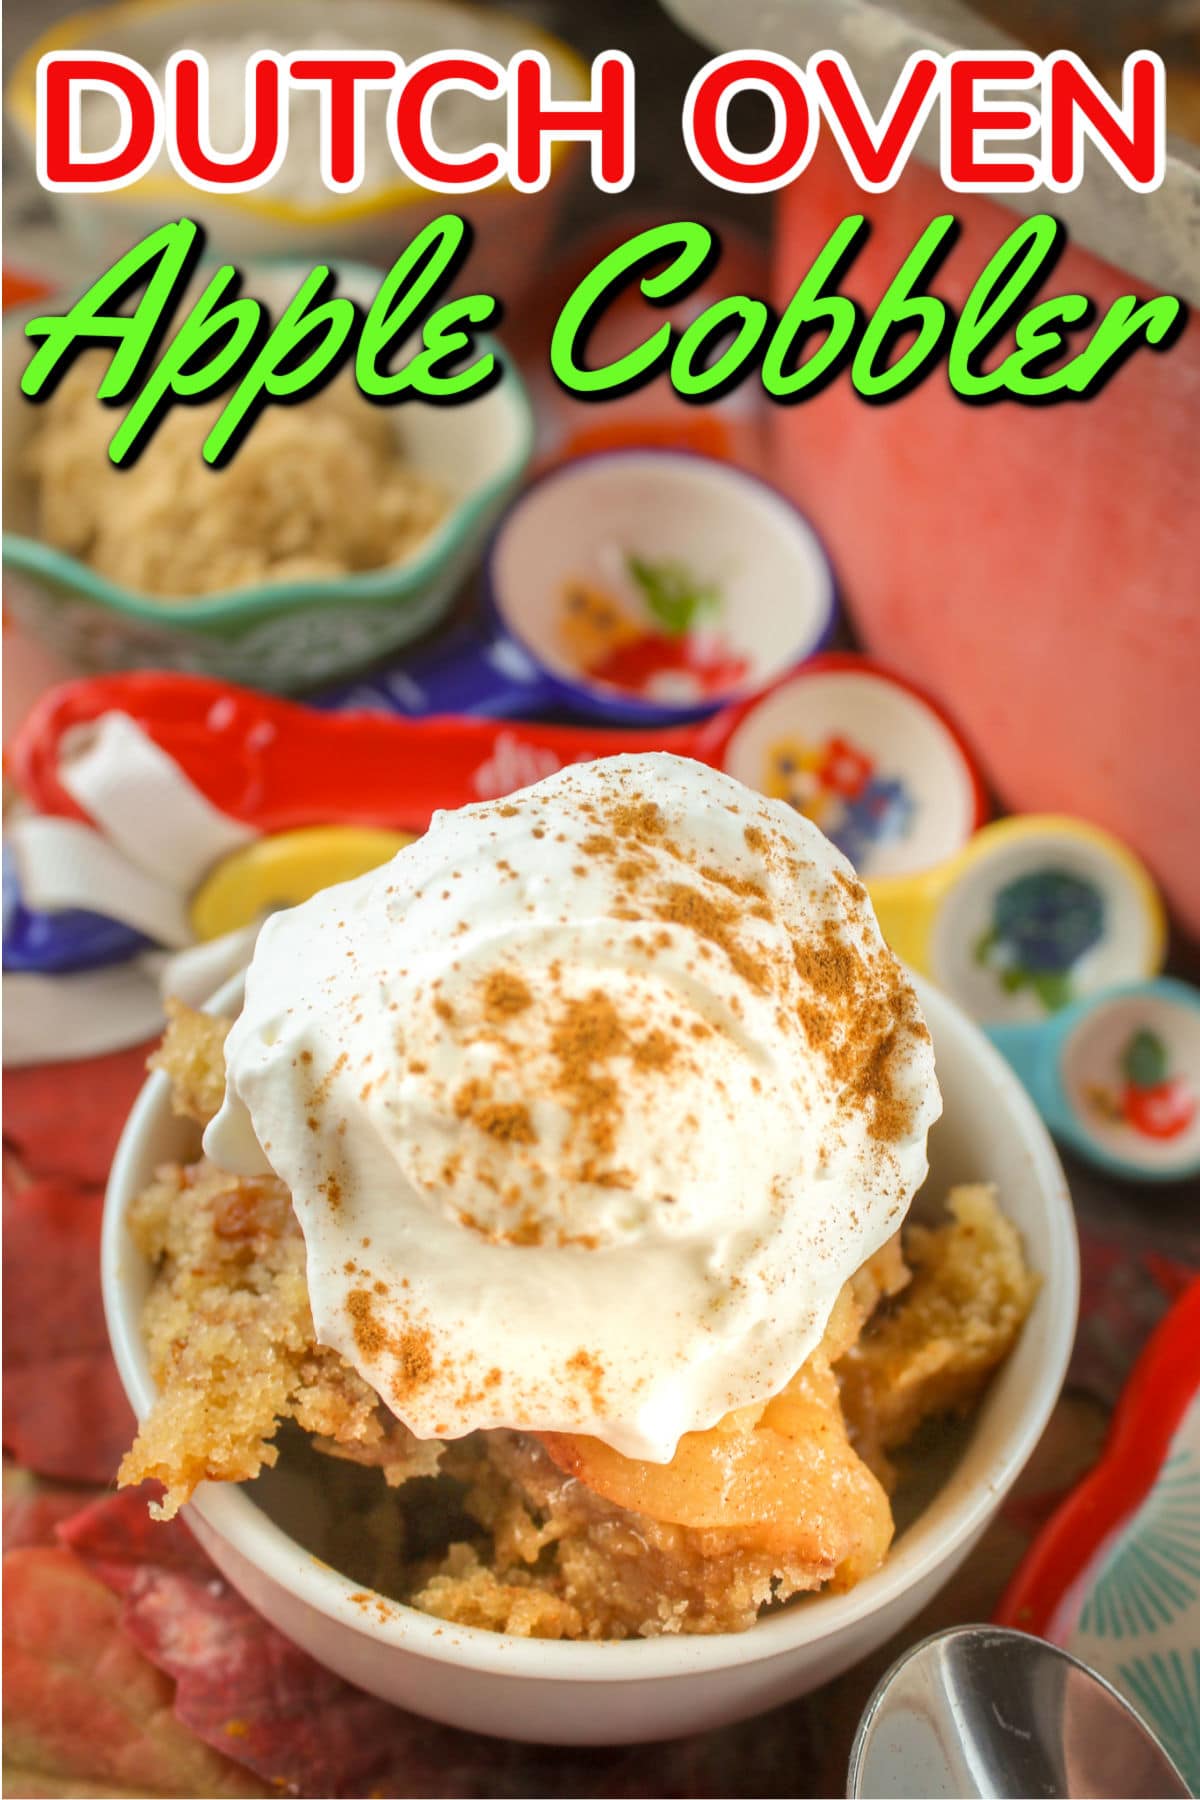 Dutch Oven Apple Cobbler is a tasty, warm and comforting dessert that goes together in ten minutes. Mine has a delicious sugary crust that everyone will love!  via @foodhussy